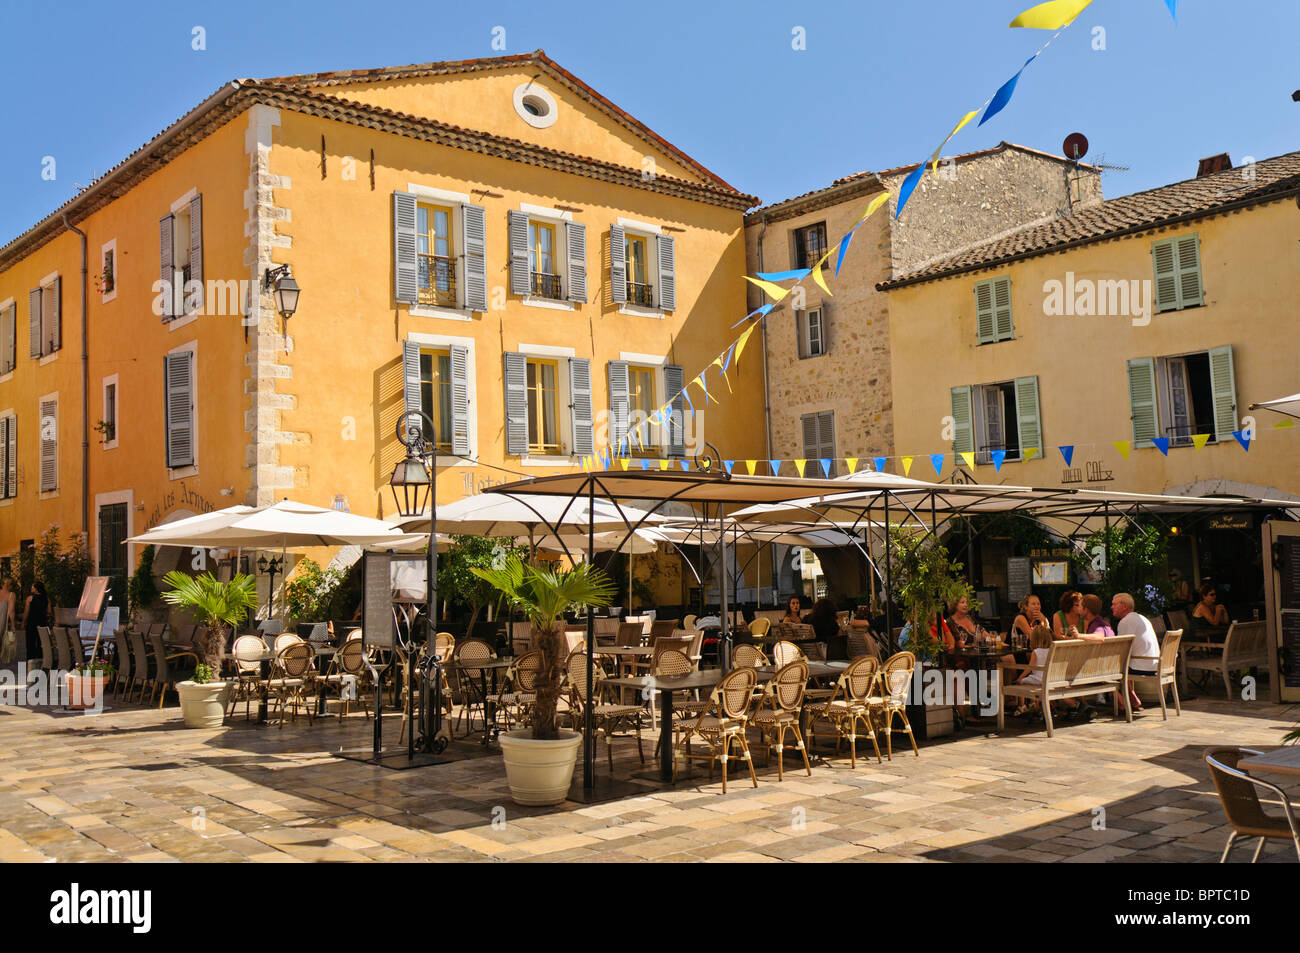 Outdoor restaurant in the Village Square of Valbonne, France Stock Photo